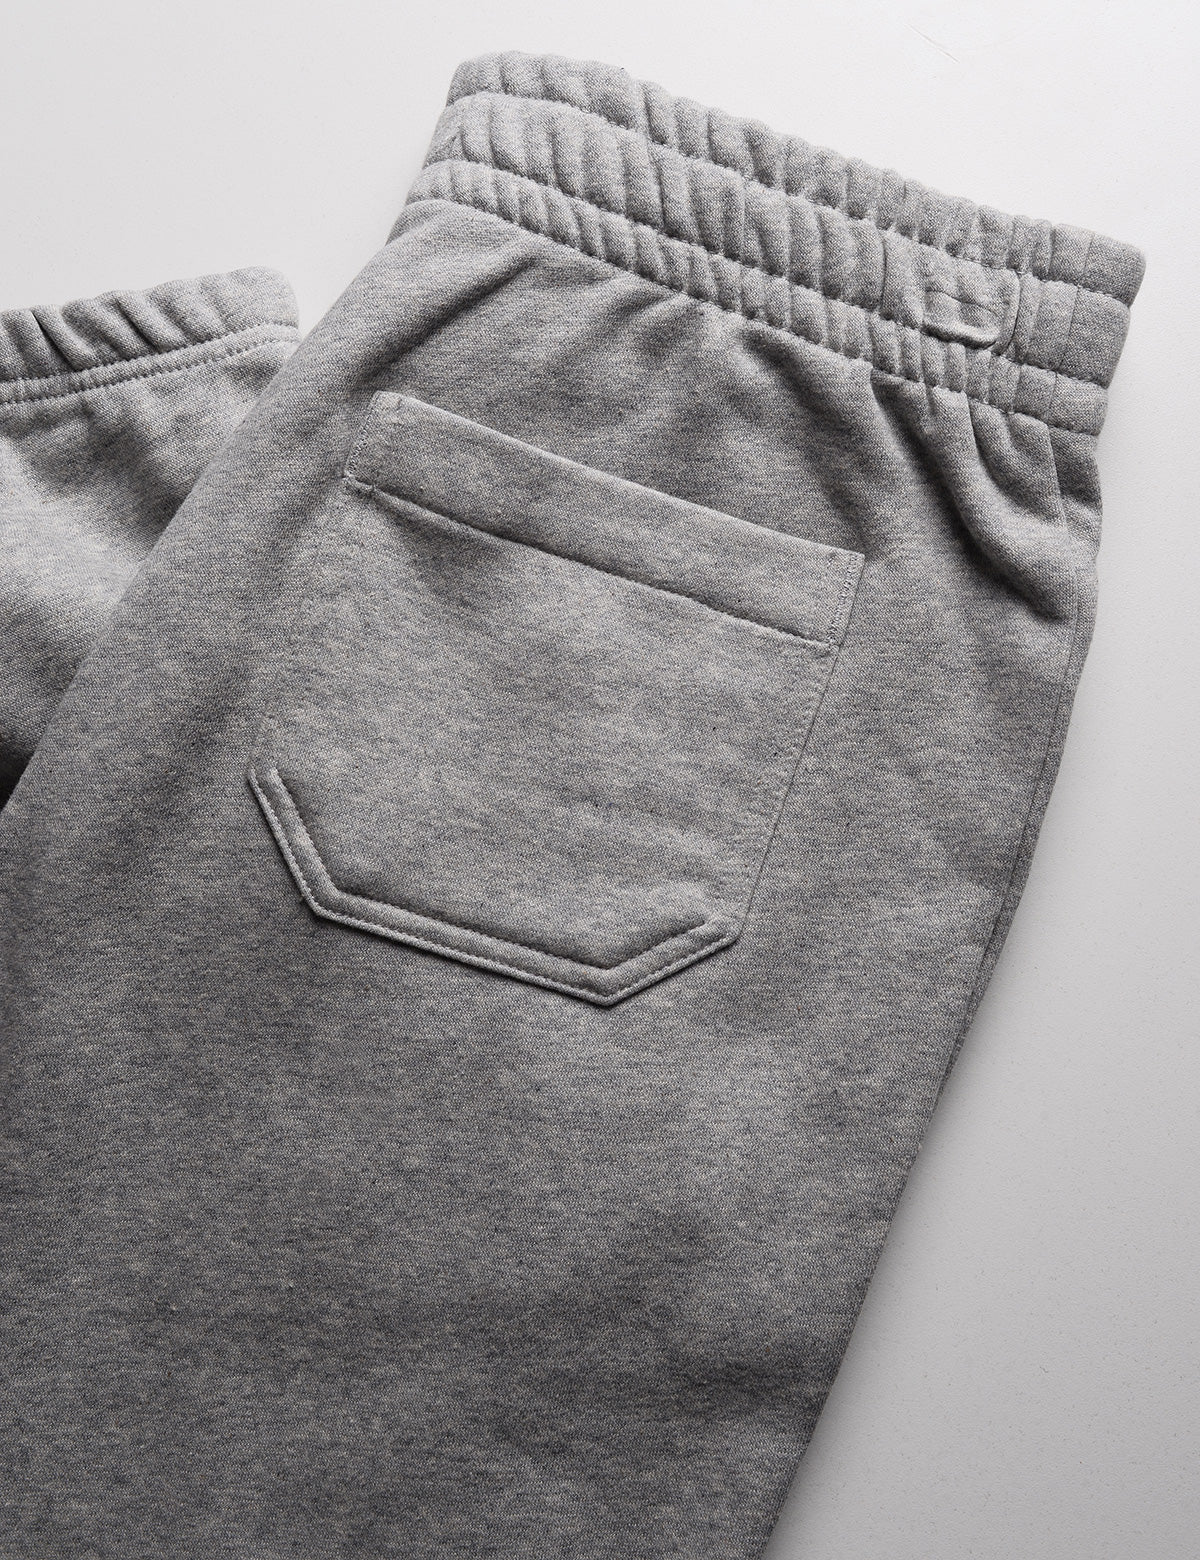 Folded detail of Calvin Klein Archive Logo Fleece Jogger - Heroic Heather Gray showing back pocket and wasitband